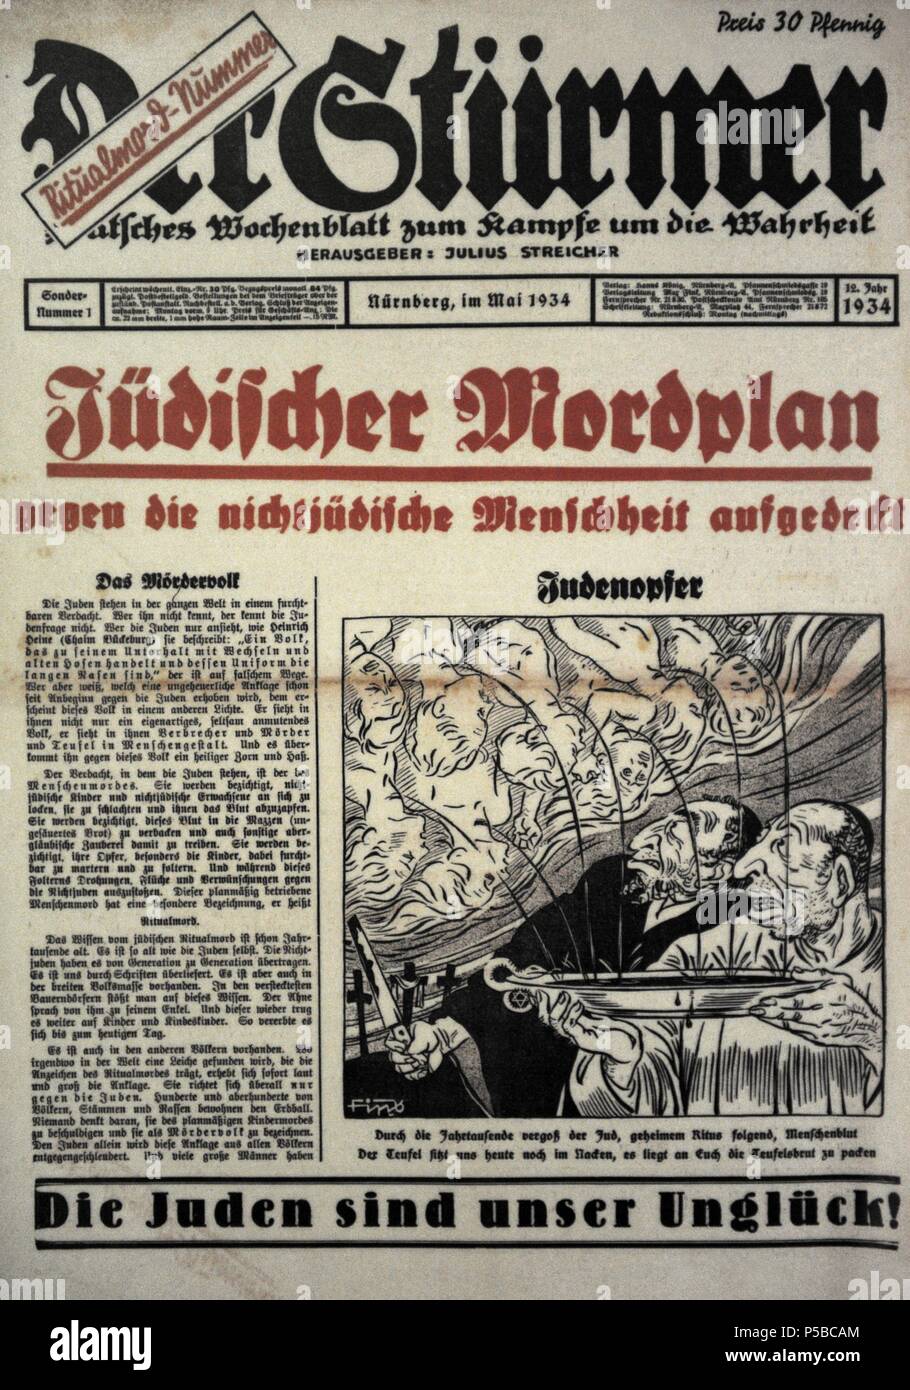 Der Sturmer. Weekly paper edited by the NSDAP Julius Streicher in Nuremberg. Front page. Special issue 1. May, 1934. Headlines: Jewish murder plan against non-jewish mankind uncovered and The jews are our misfortune. Dachau Concentration Camp Memorial Site. Germany. Stock Photo